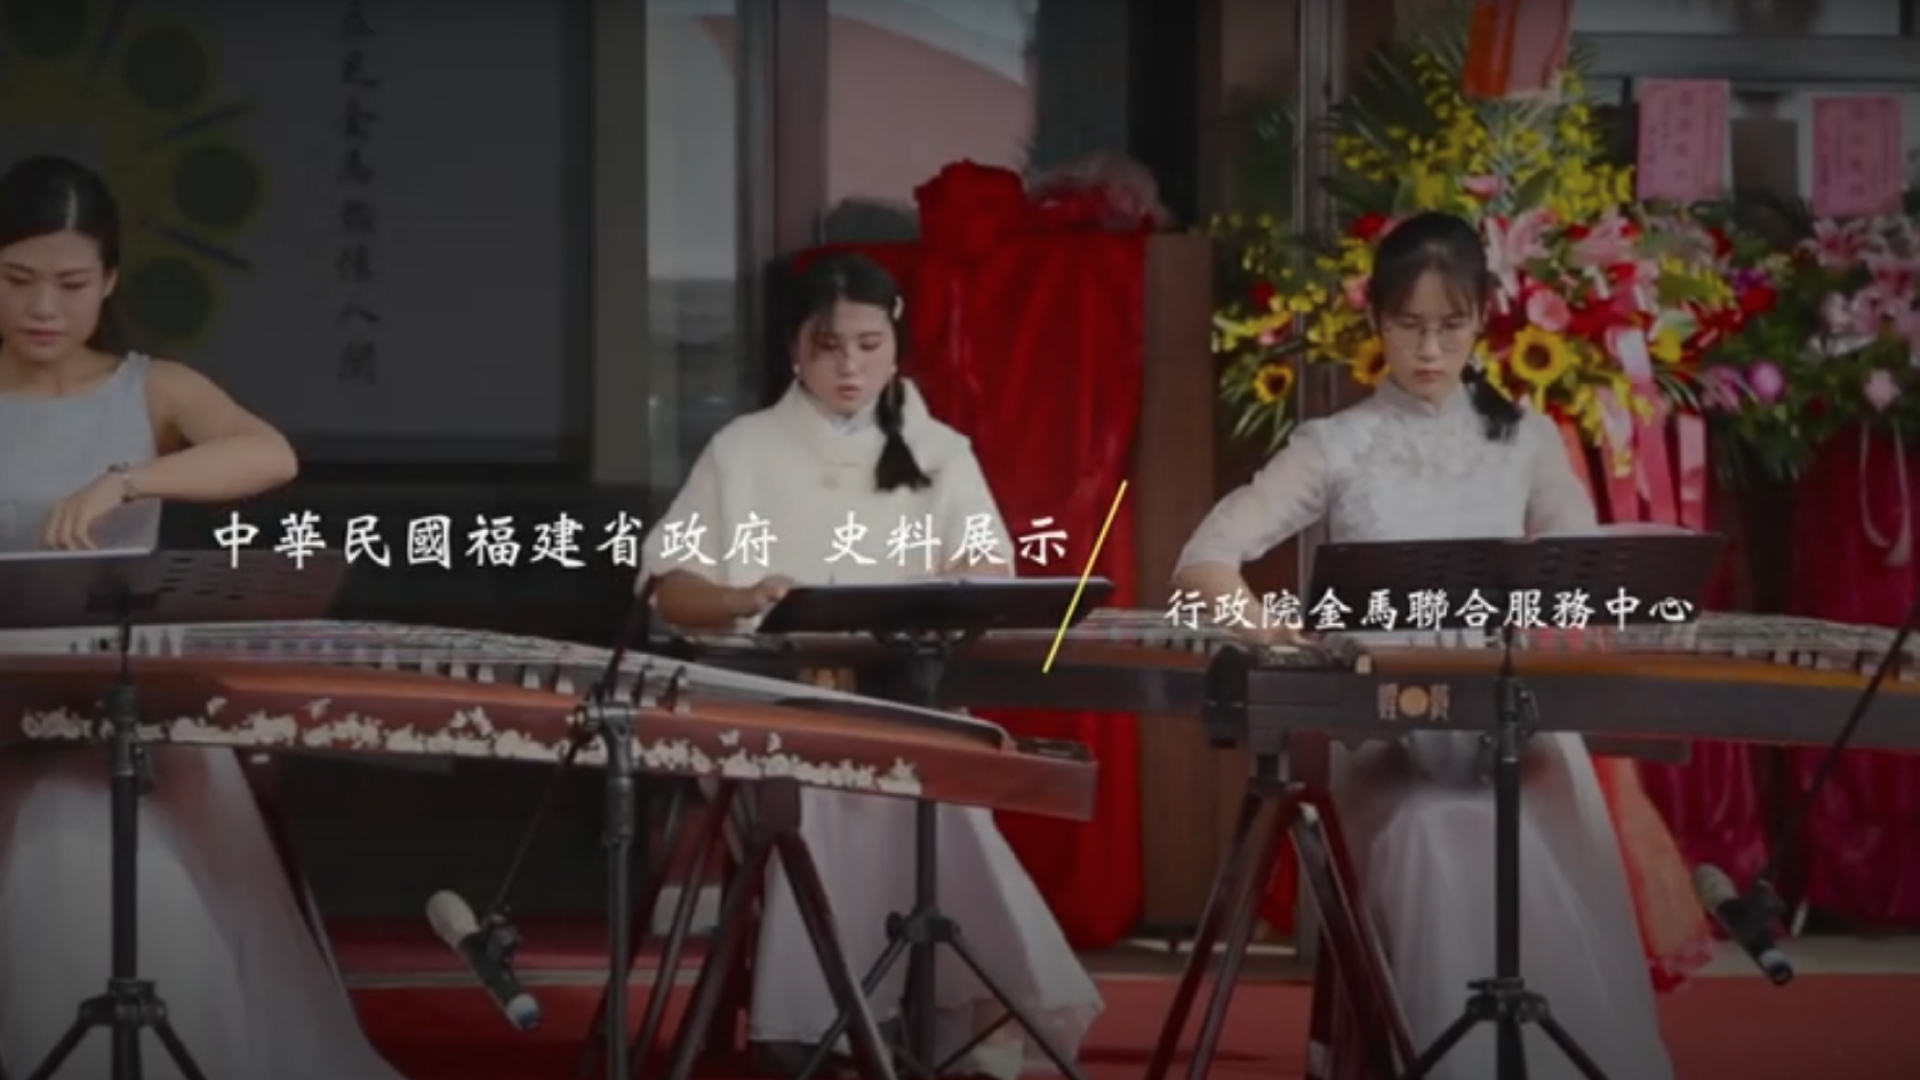 Video of the unveiling ceremony of the Historical Archive Exhibition of the Fujian Provincial Government of the Republic of China on November 7, 2021